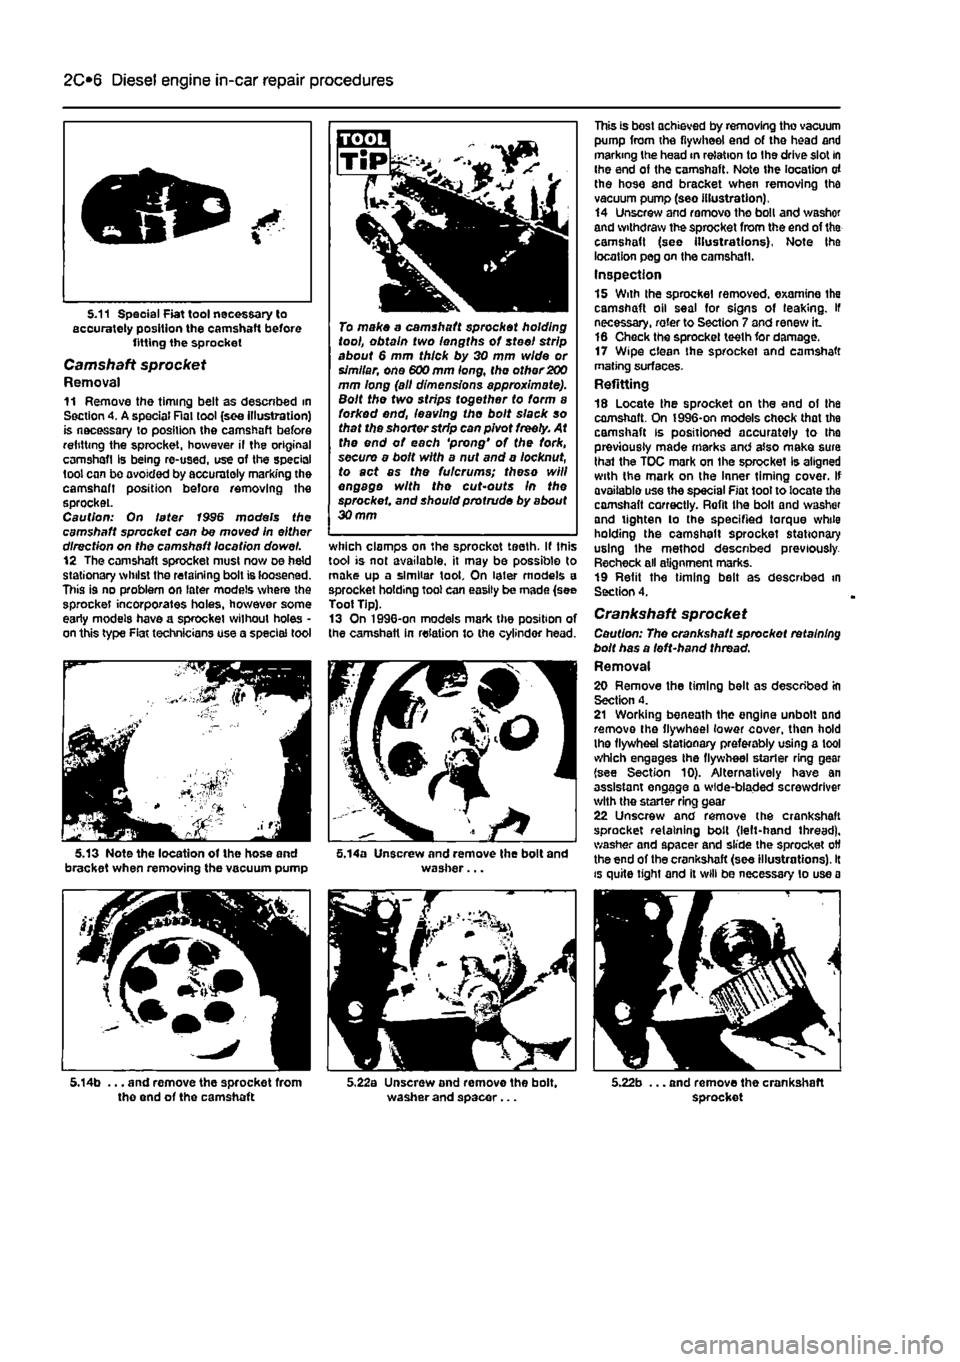 FIAT PUNTO 1999 176 / 1.G Manual PDF 
2C*2 Diesel engine in-car repair procedures 
5.11 Special Fiat tool necessary to accurately position the camshaft before fitting the sprocket 
Camshaft sprocket Removal 11 Remove the timing belt as d